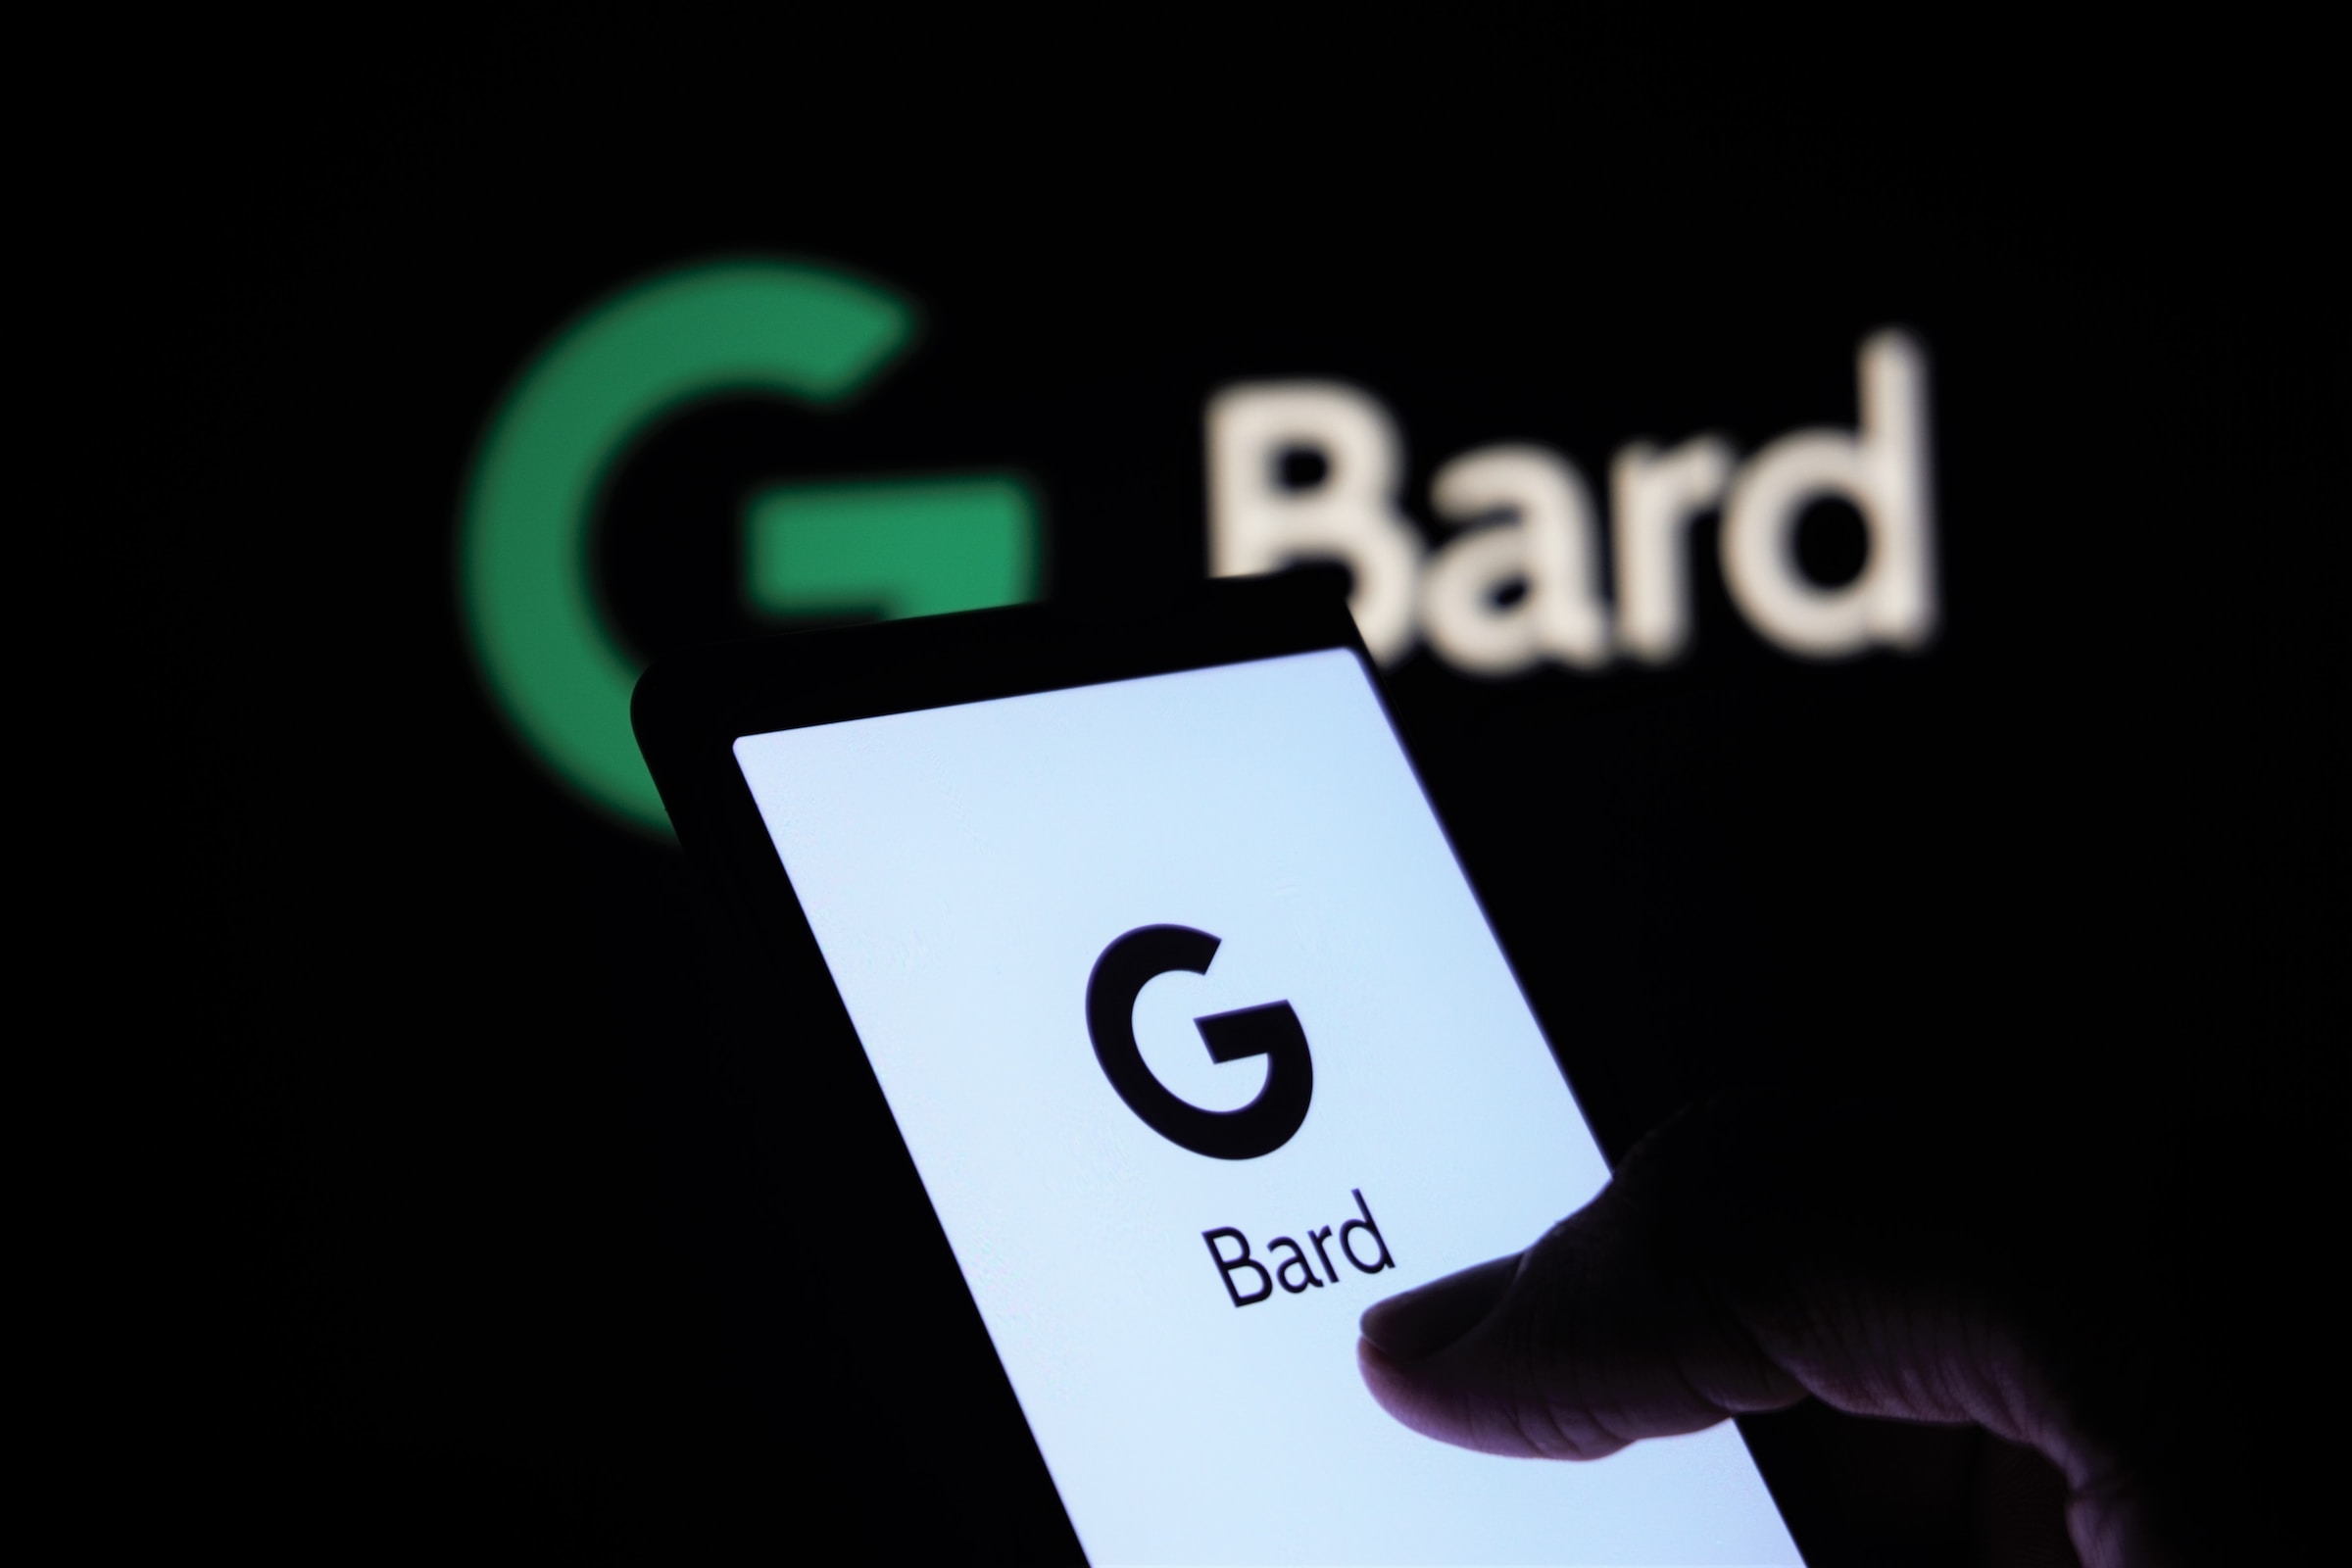 A person holding a phone in a very dark room, with Google Bard on the screen, and the Google Bard logo illuminated in the background.